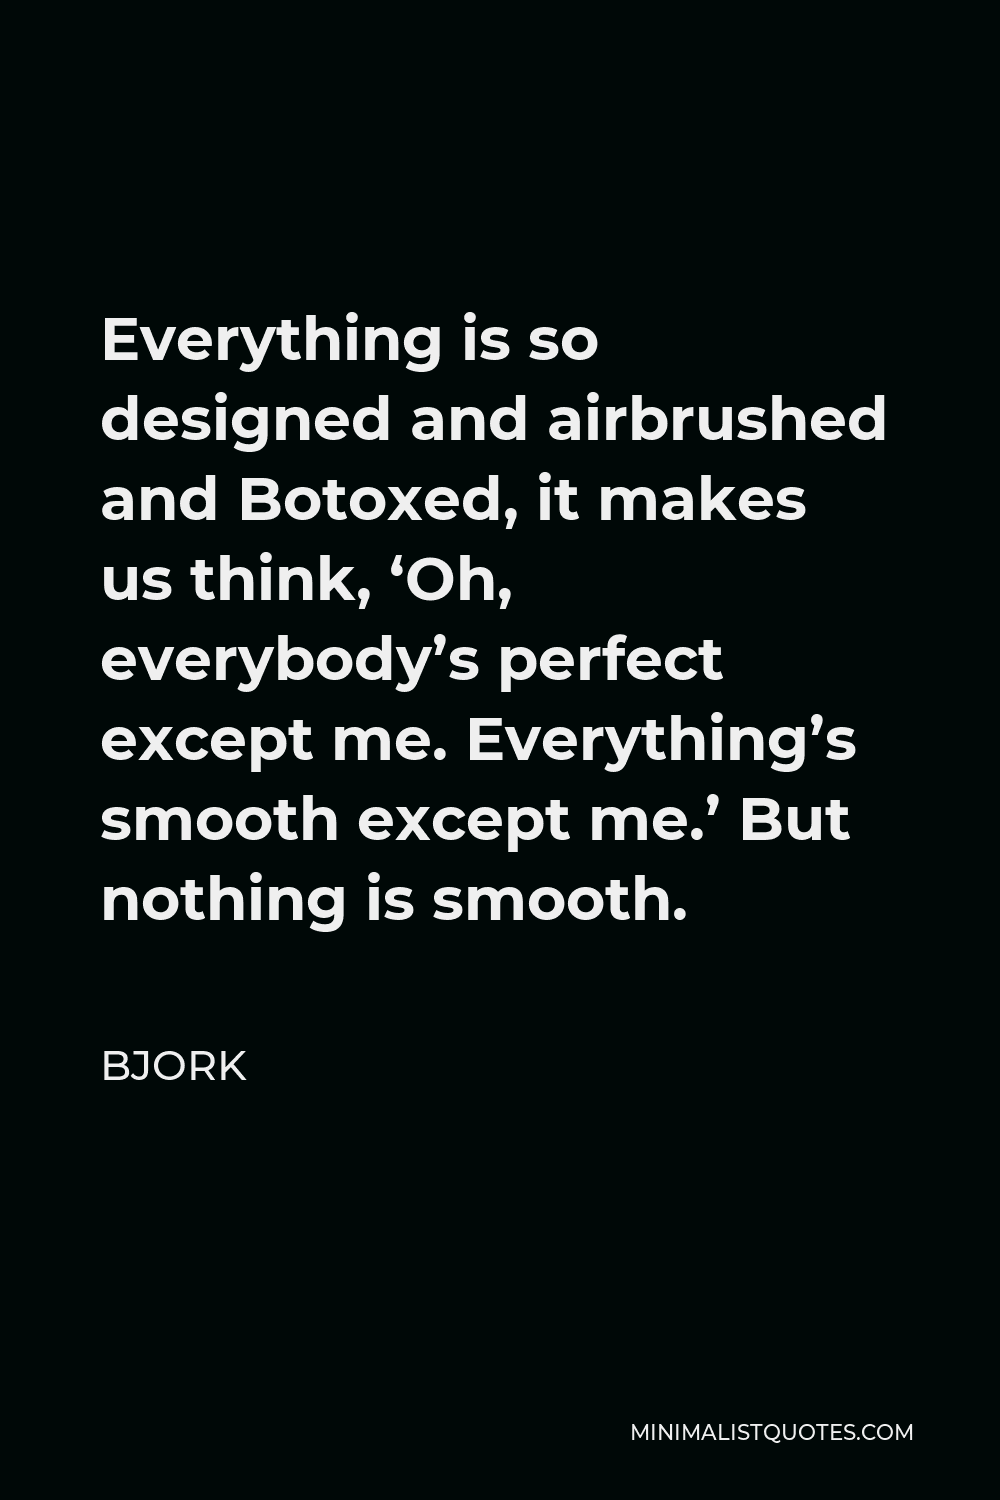 Bjork Quote - Everything is so designed and airbrushed and Botoxed, it makes us think, ‘Oh, everybody’s perfect except me. Everything’s smooth except me.’ But nothing is smooth.